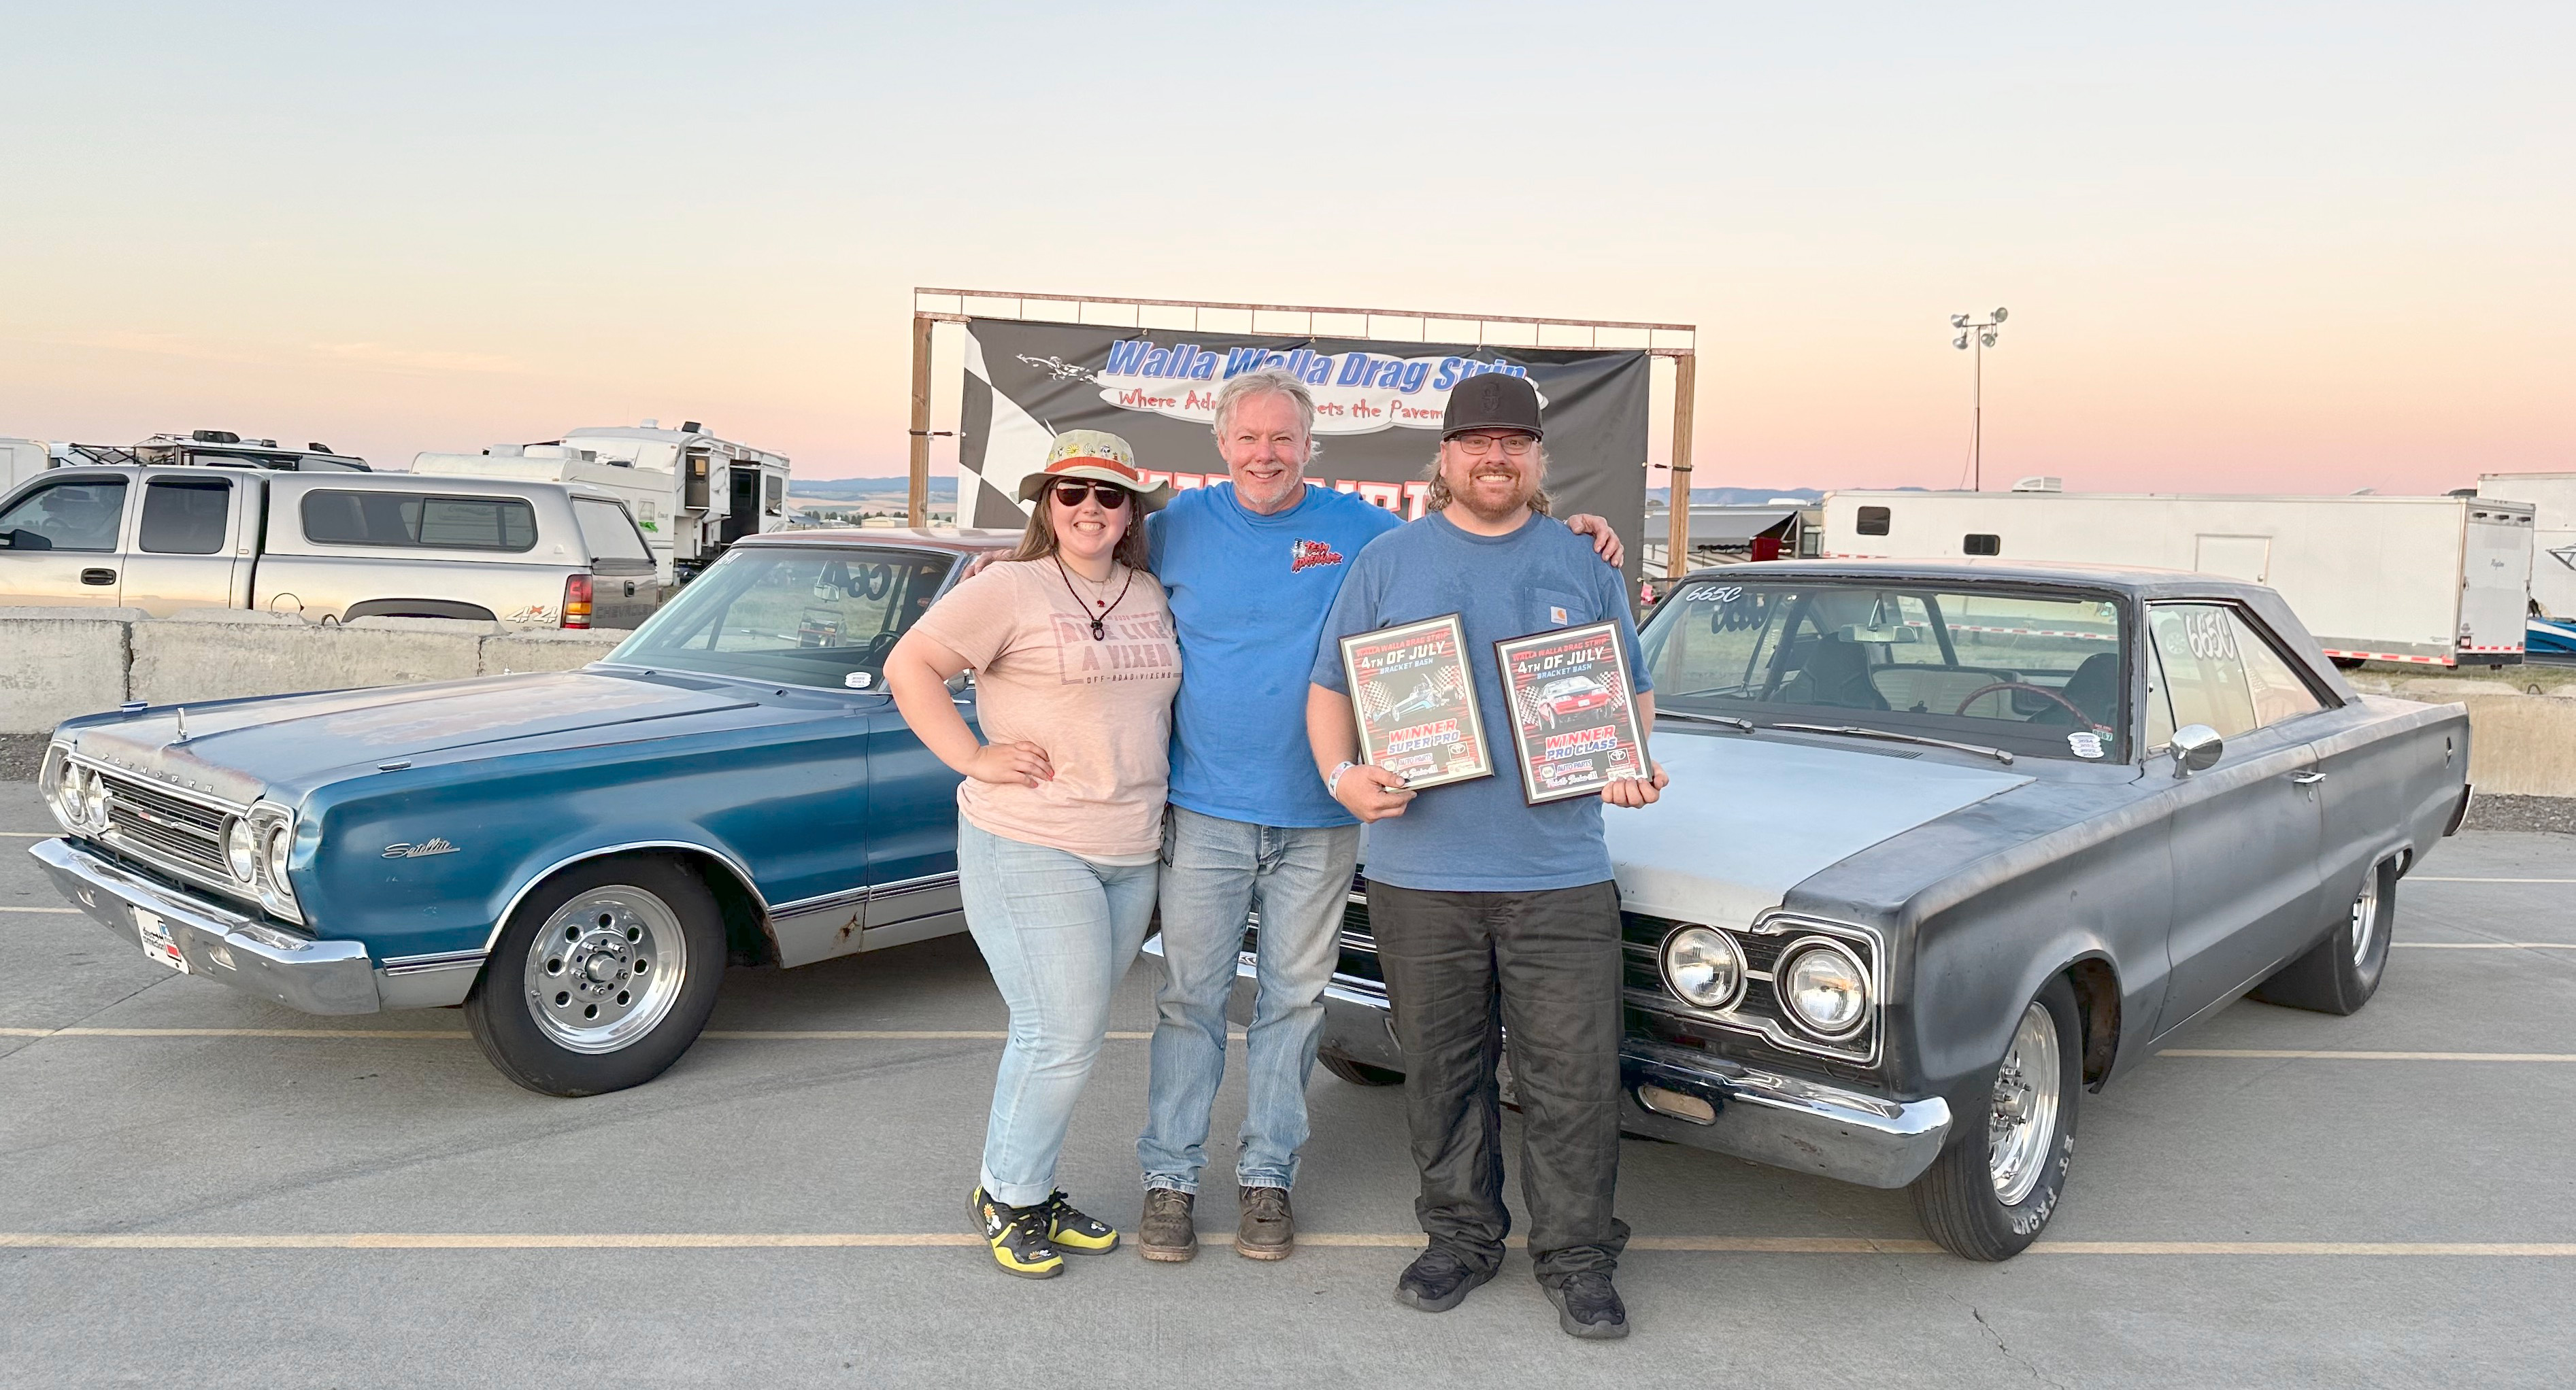 Medical Lake’s Cooper family (L-R): Stephanie Frisch, Steven Cooper and Justin Cooper came away big winners in a recent outing at the Walla Walla Drag Strip. Cooper family photo